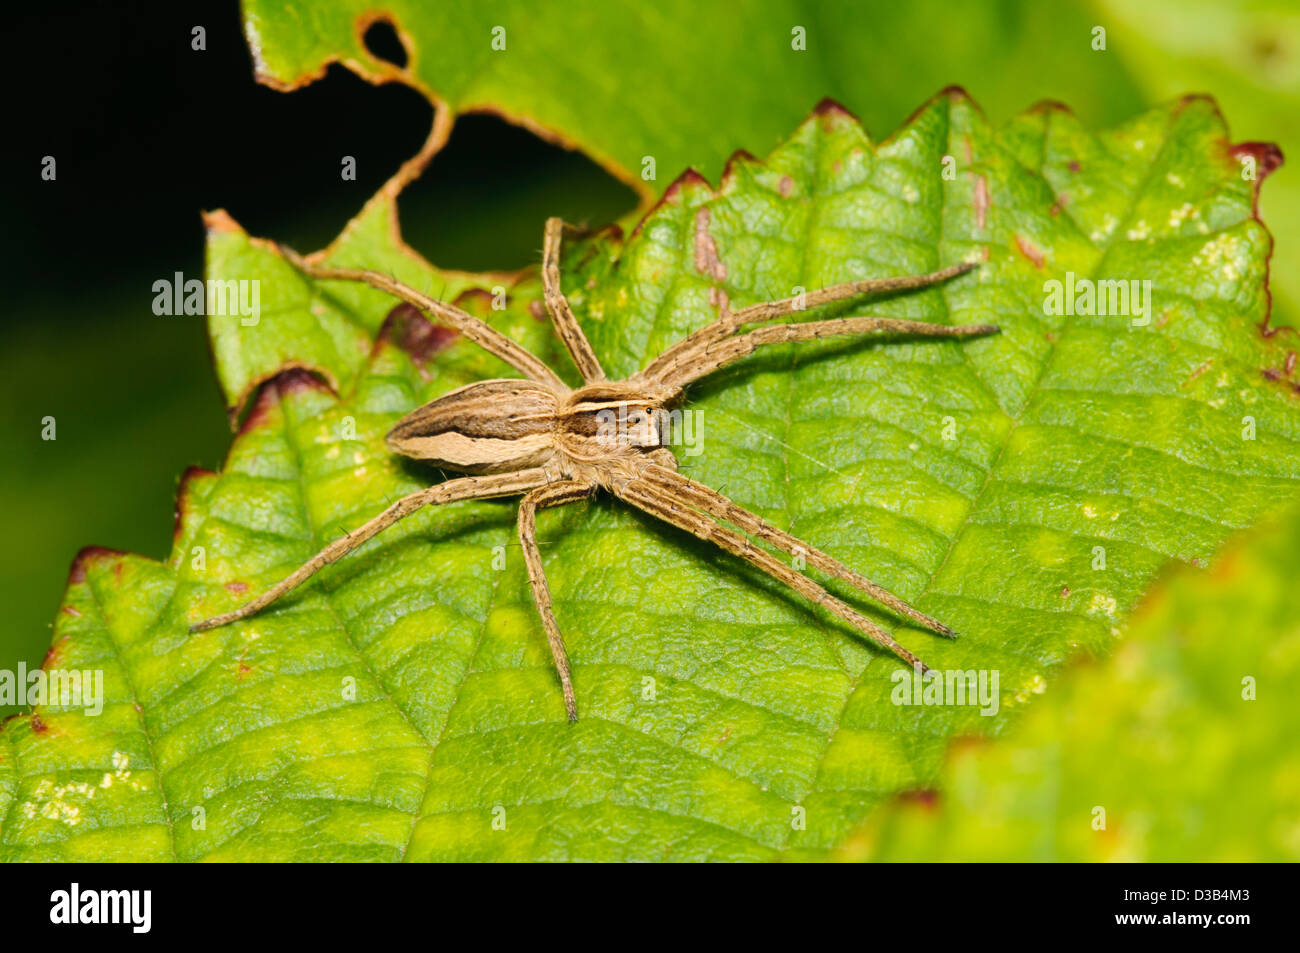 A nursery web spider (Pisaura mirabilis) basking on a leaf at Crossness Nature Reserve, Bexley, Kent. September. Stock Photo